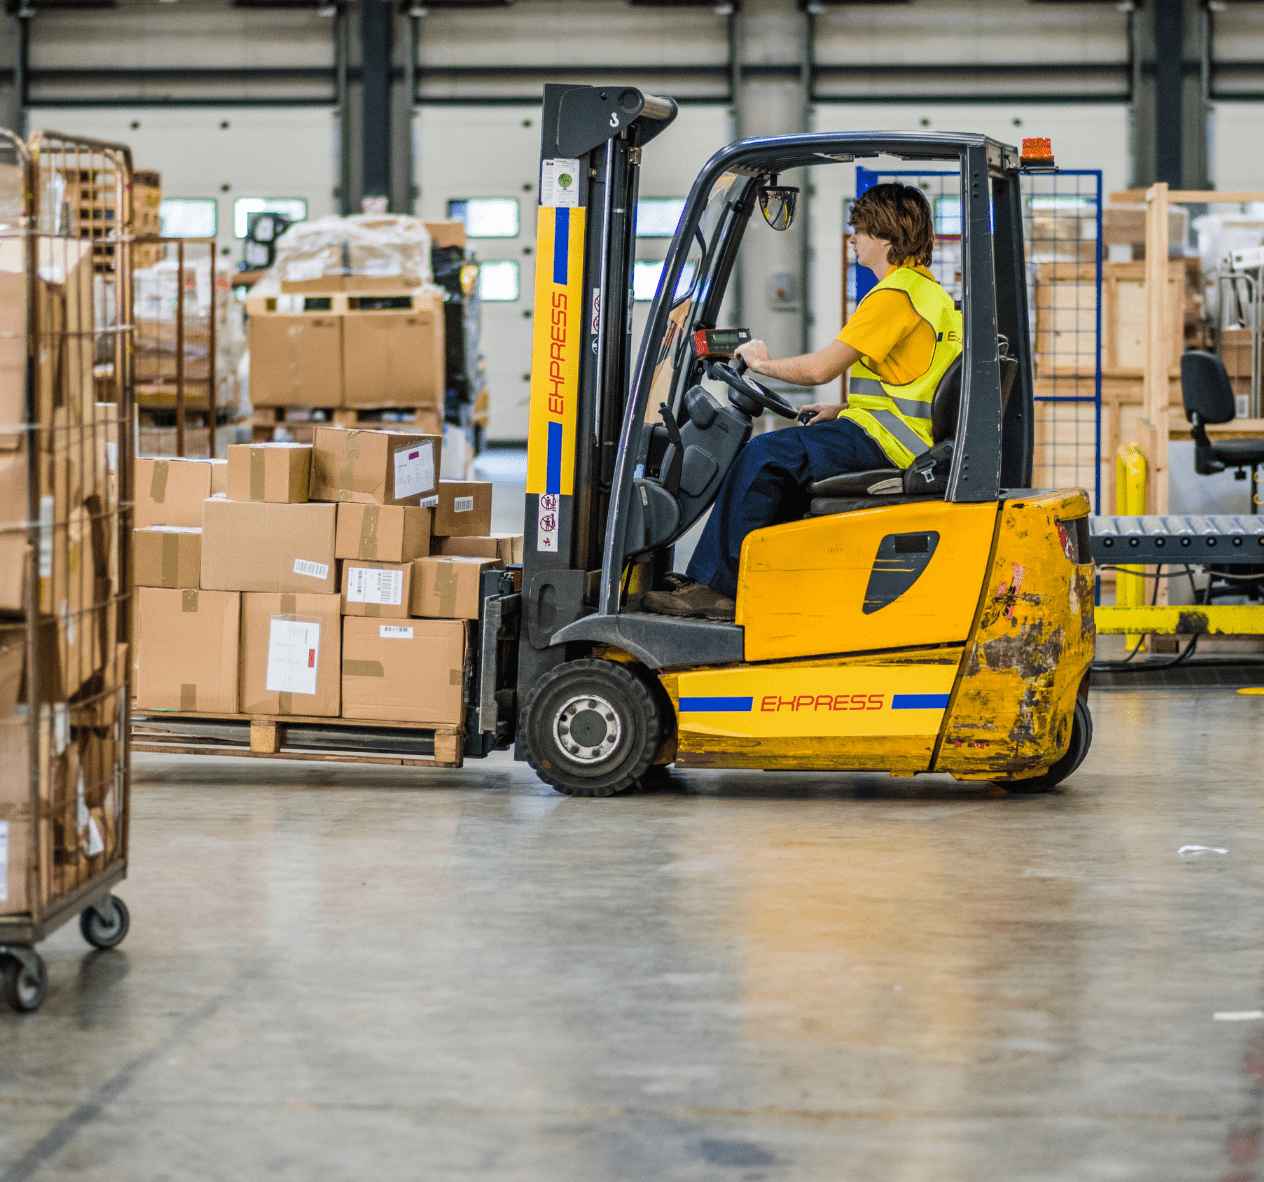 the employee working with the forklift